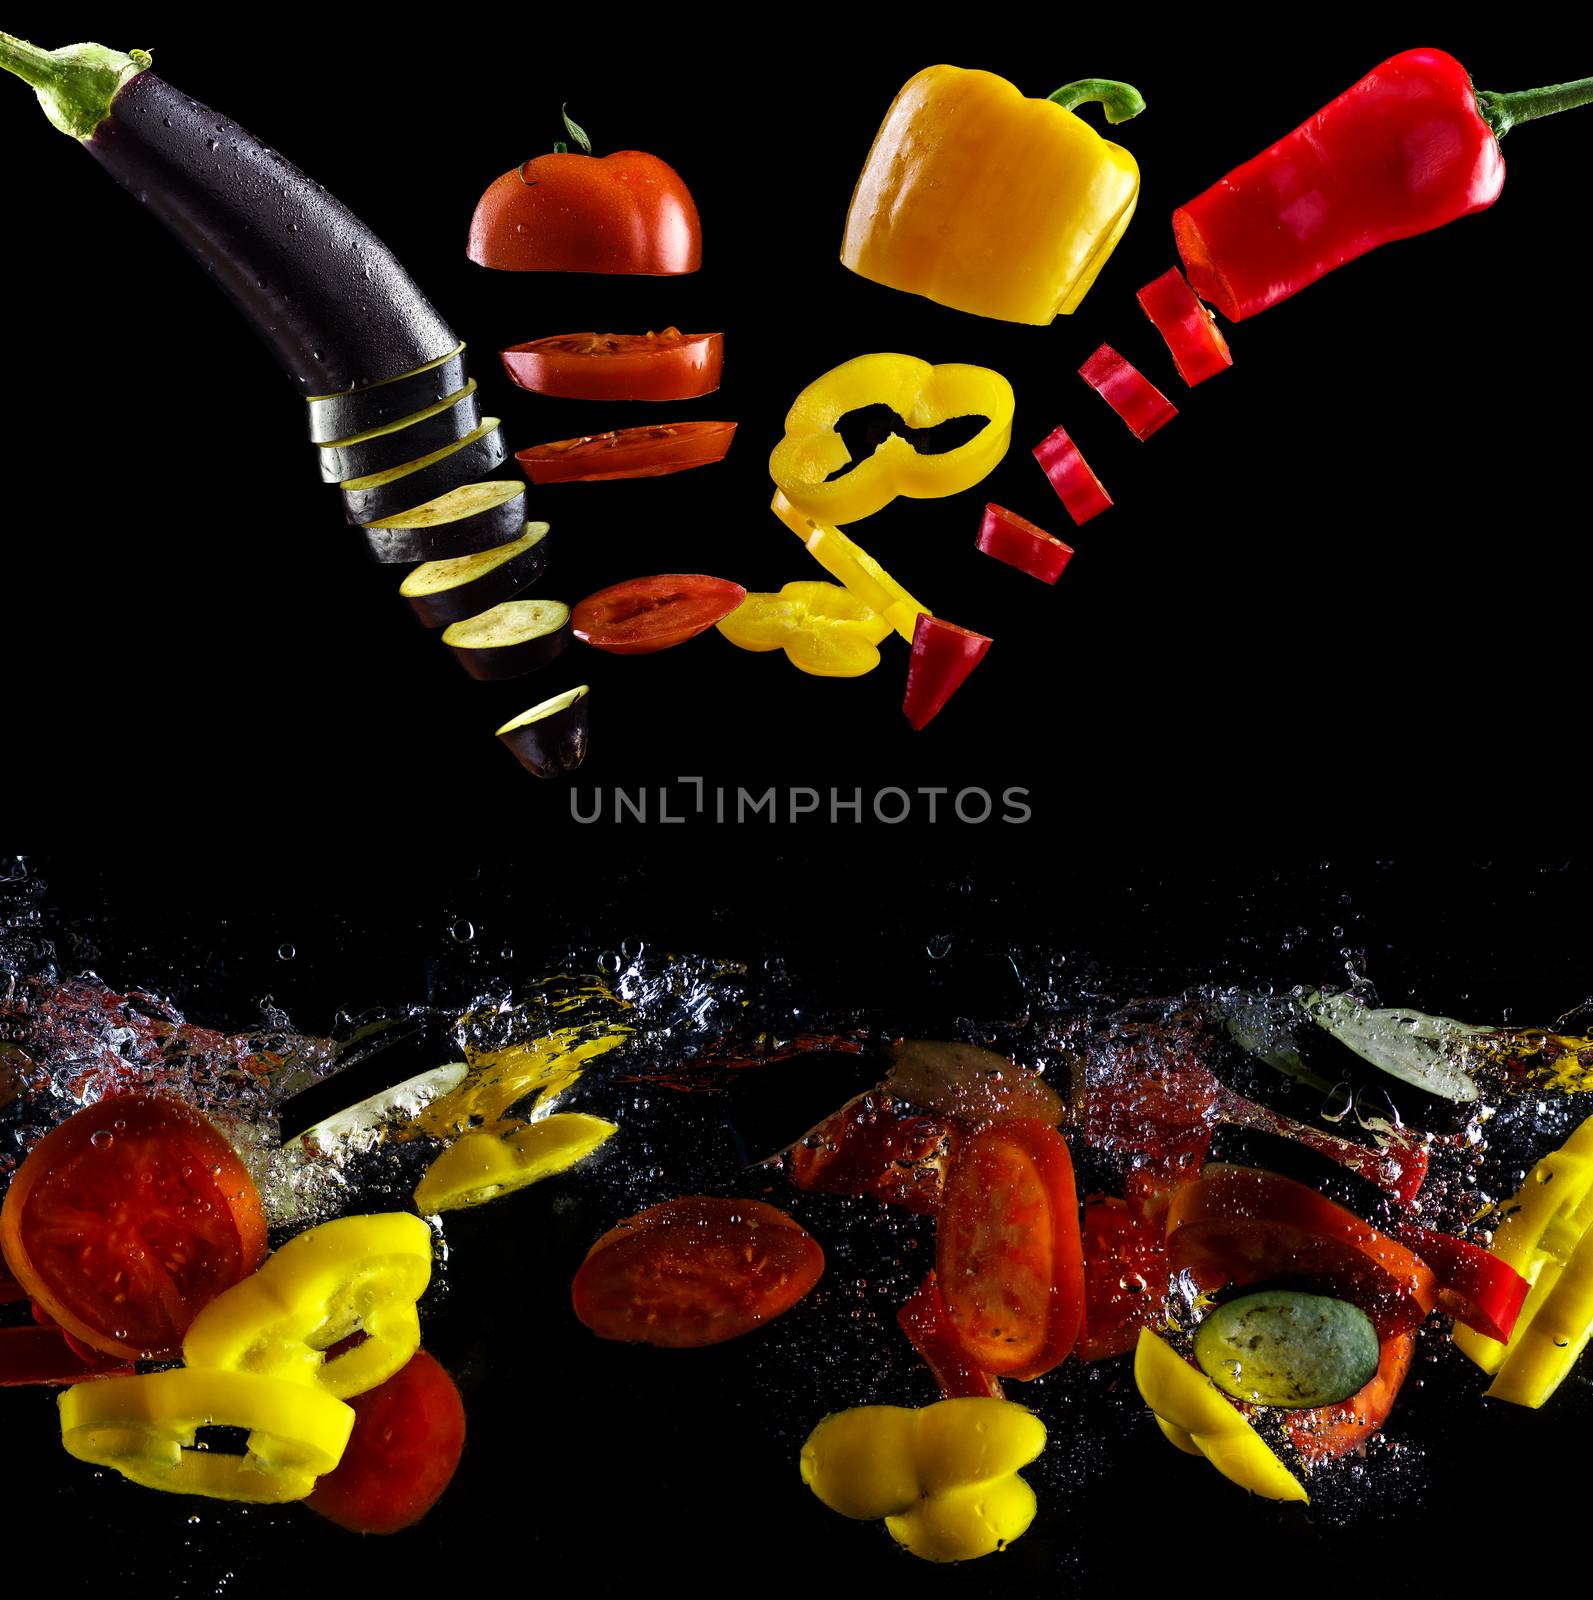 Tomato, two types of paprika and eggplant slices fall into water, on black background